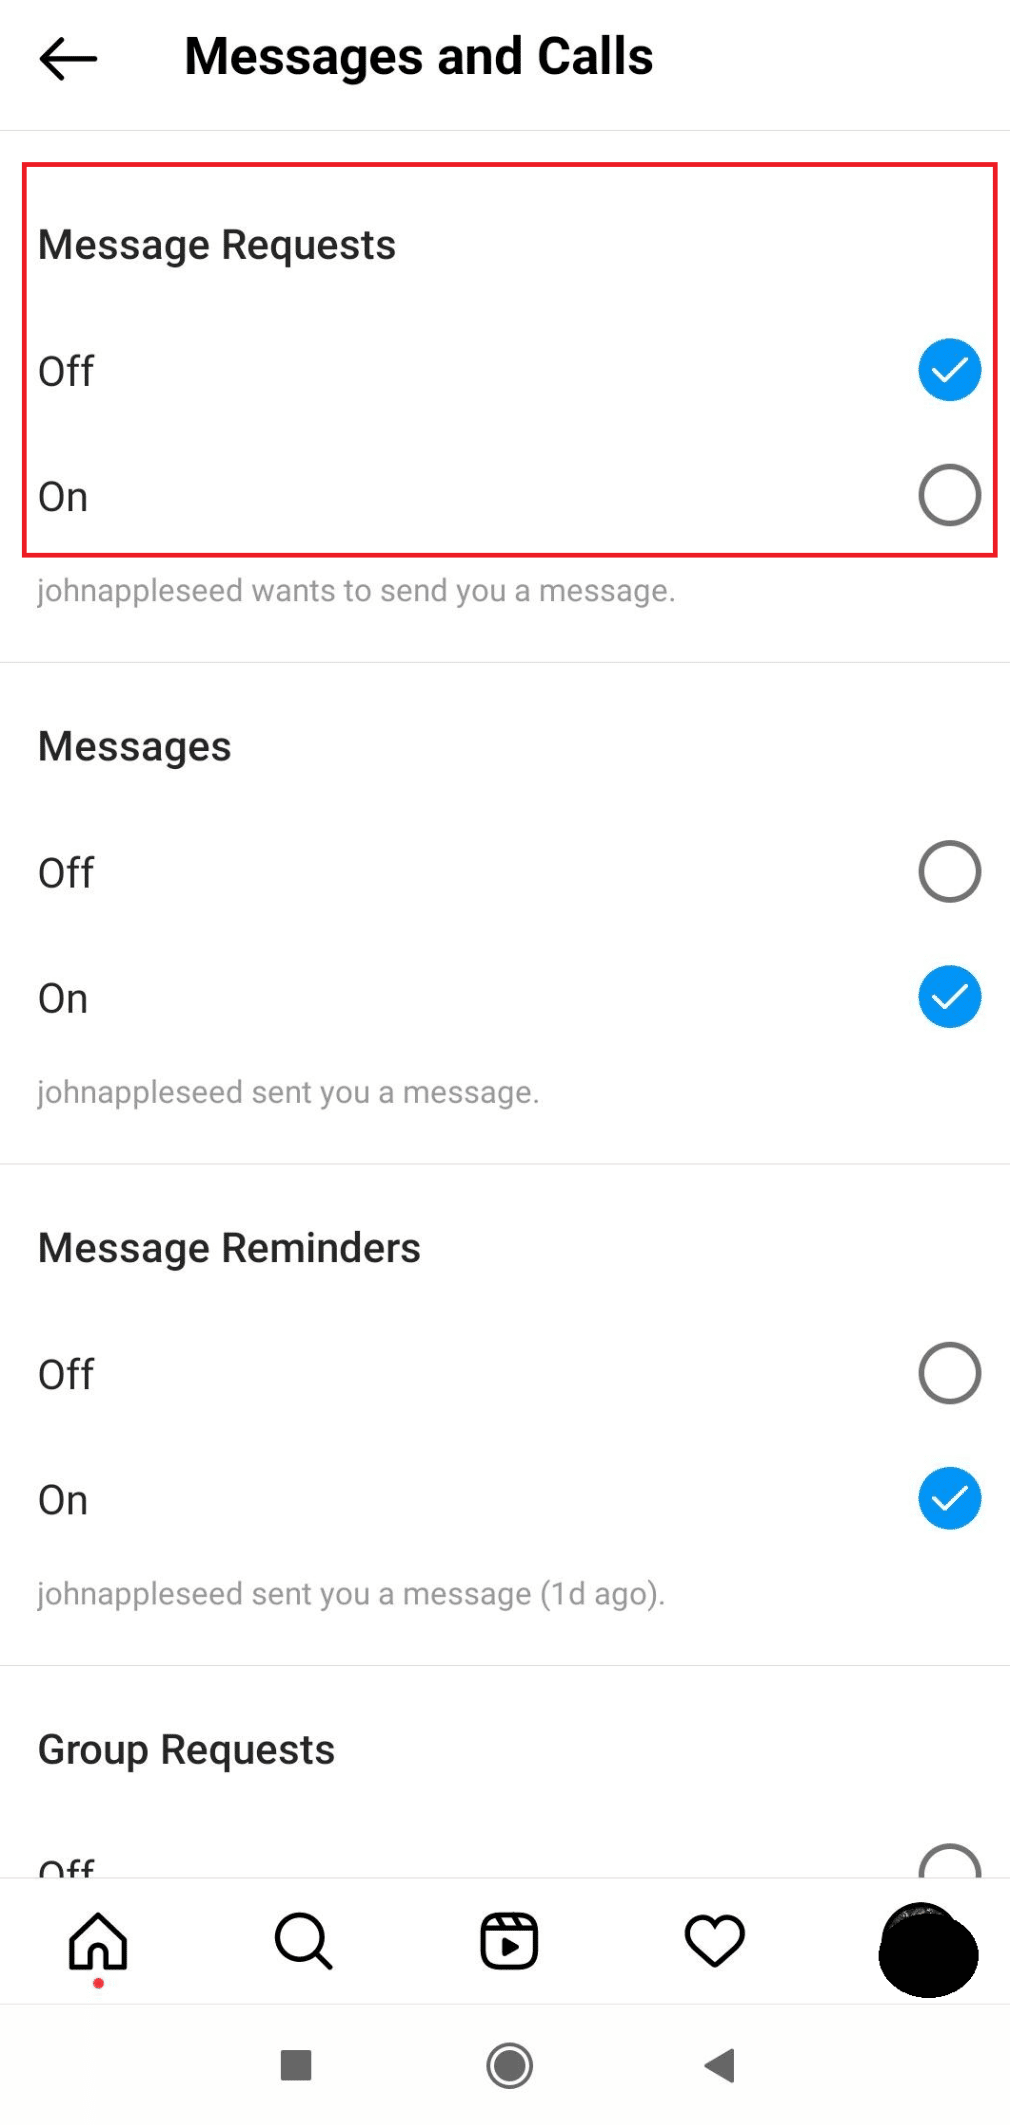 Message request off